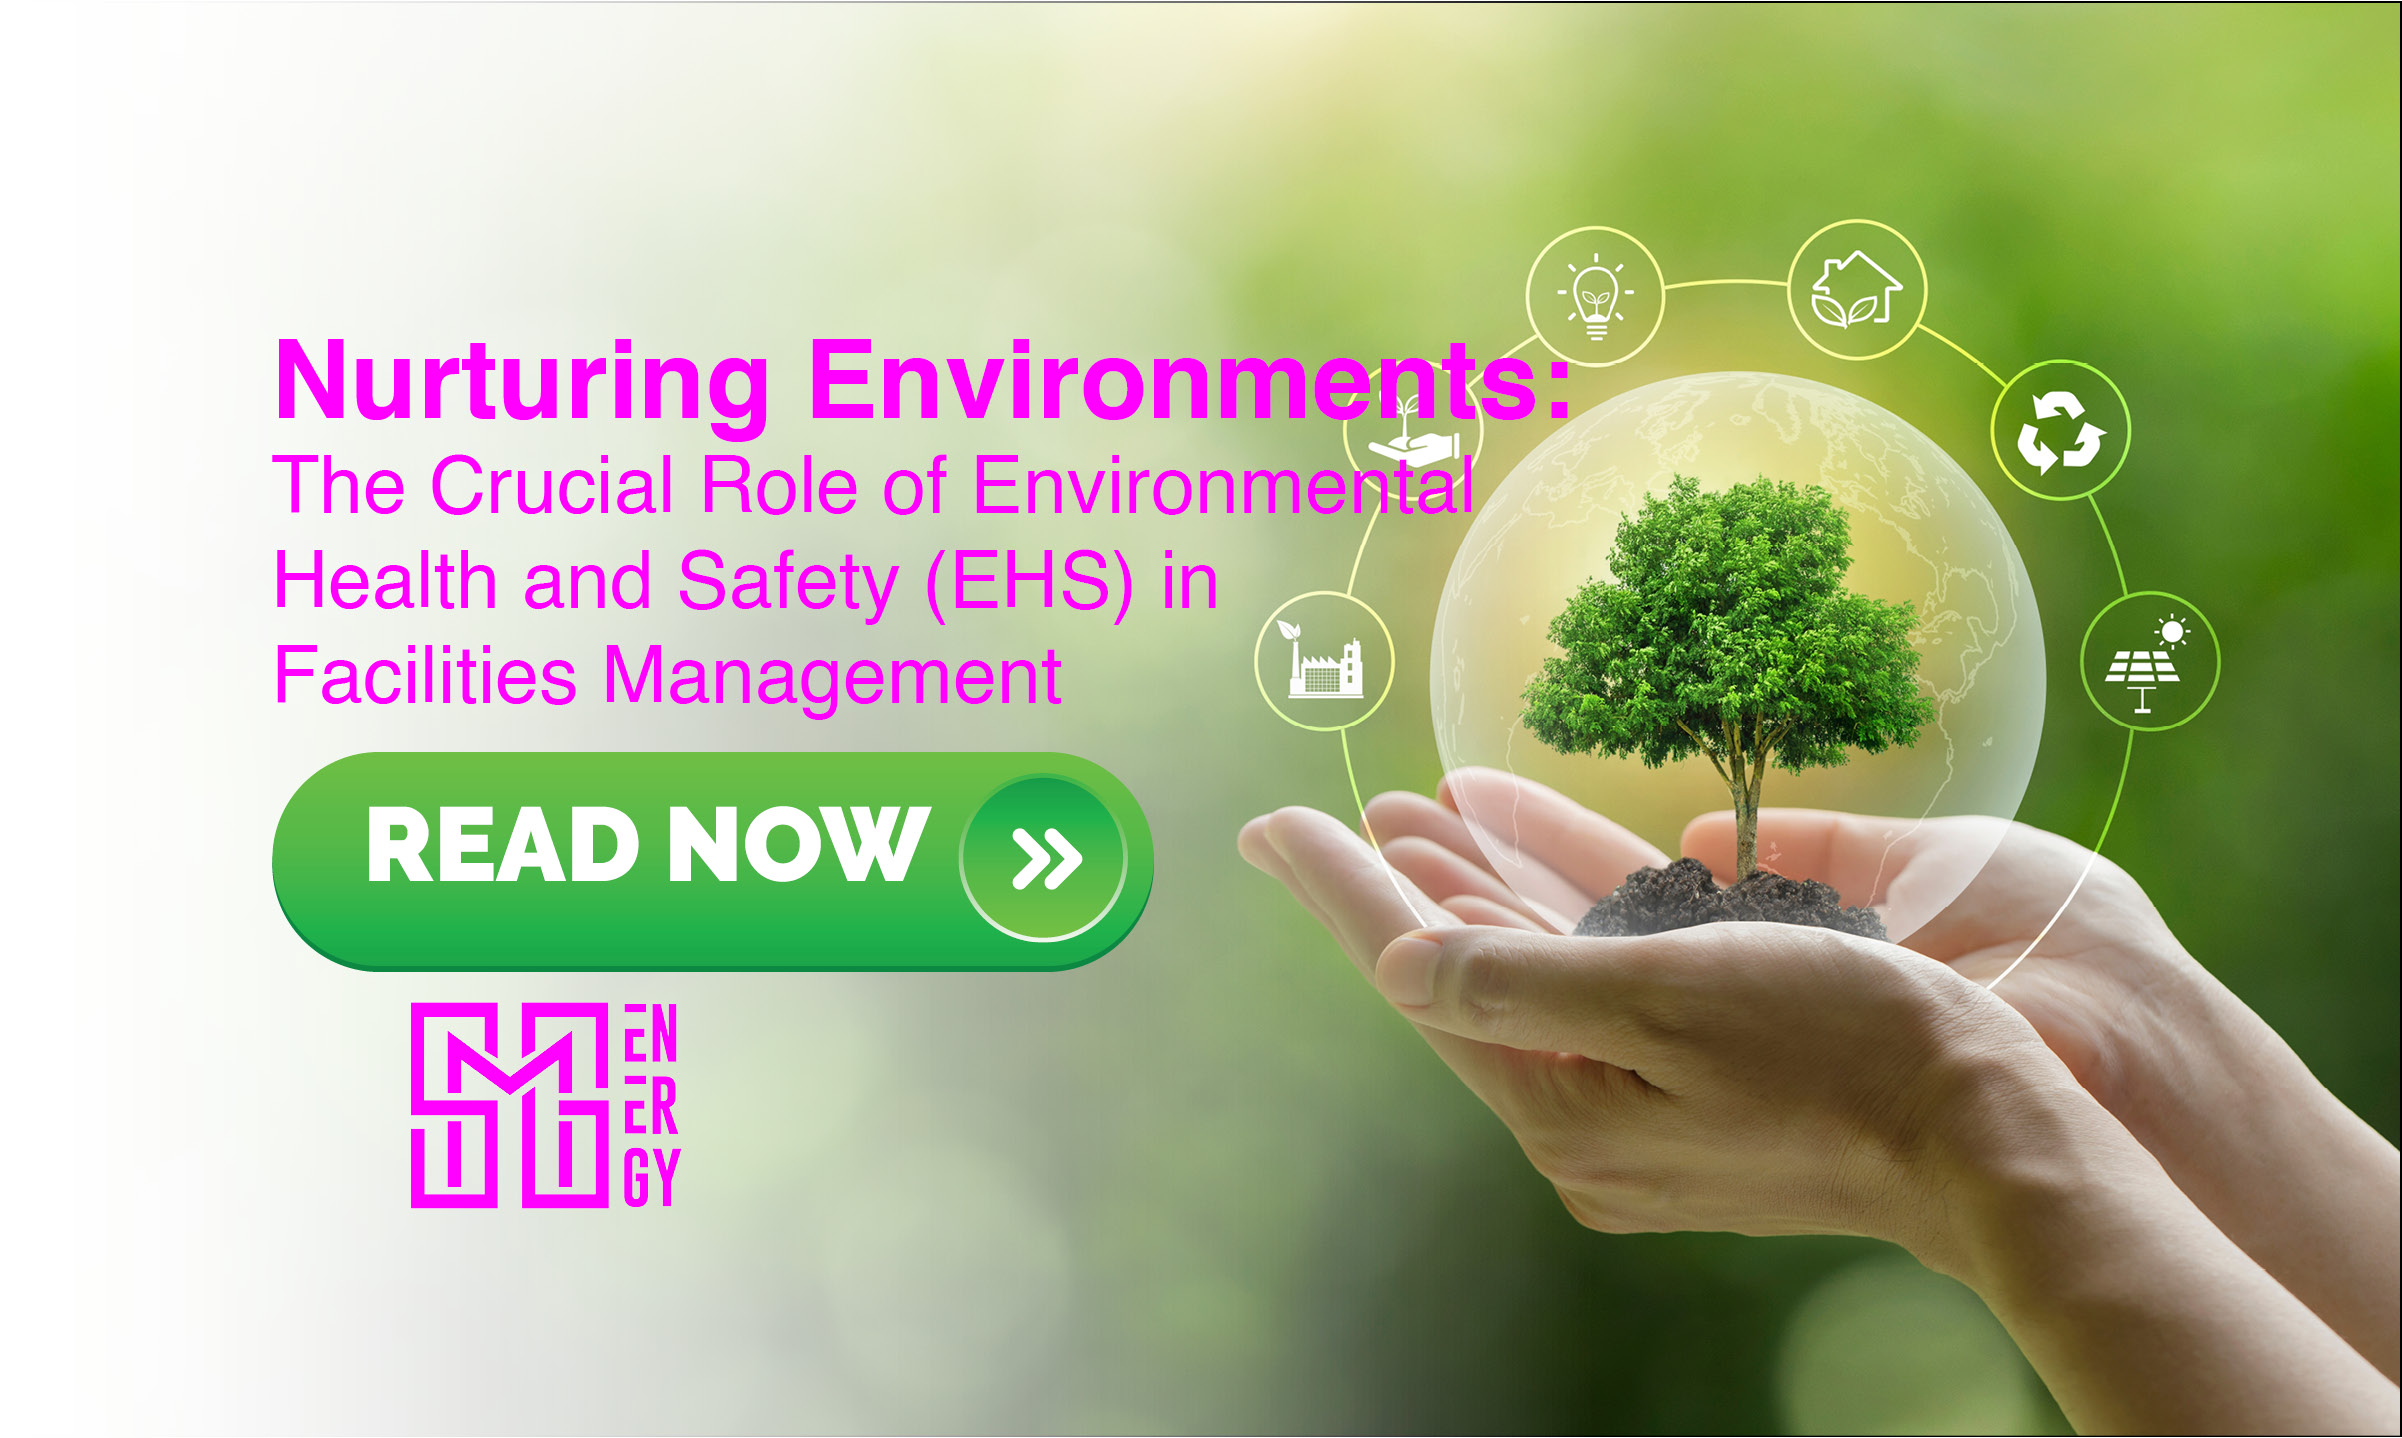 Nurturing Environments: The Crucial Role of Environmental Health and Safety (EHS) in Facilities Management